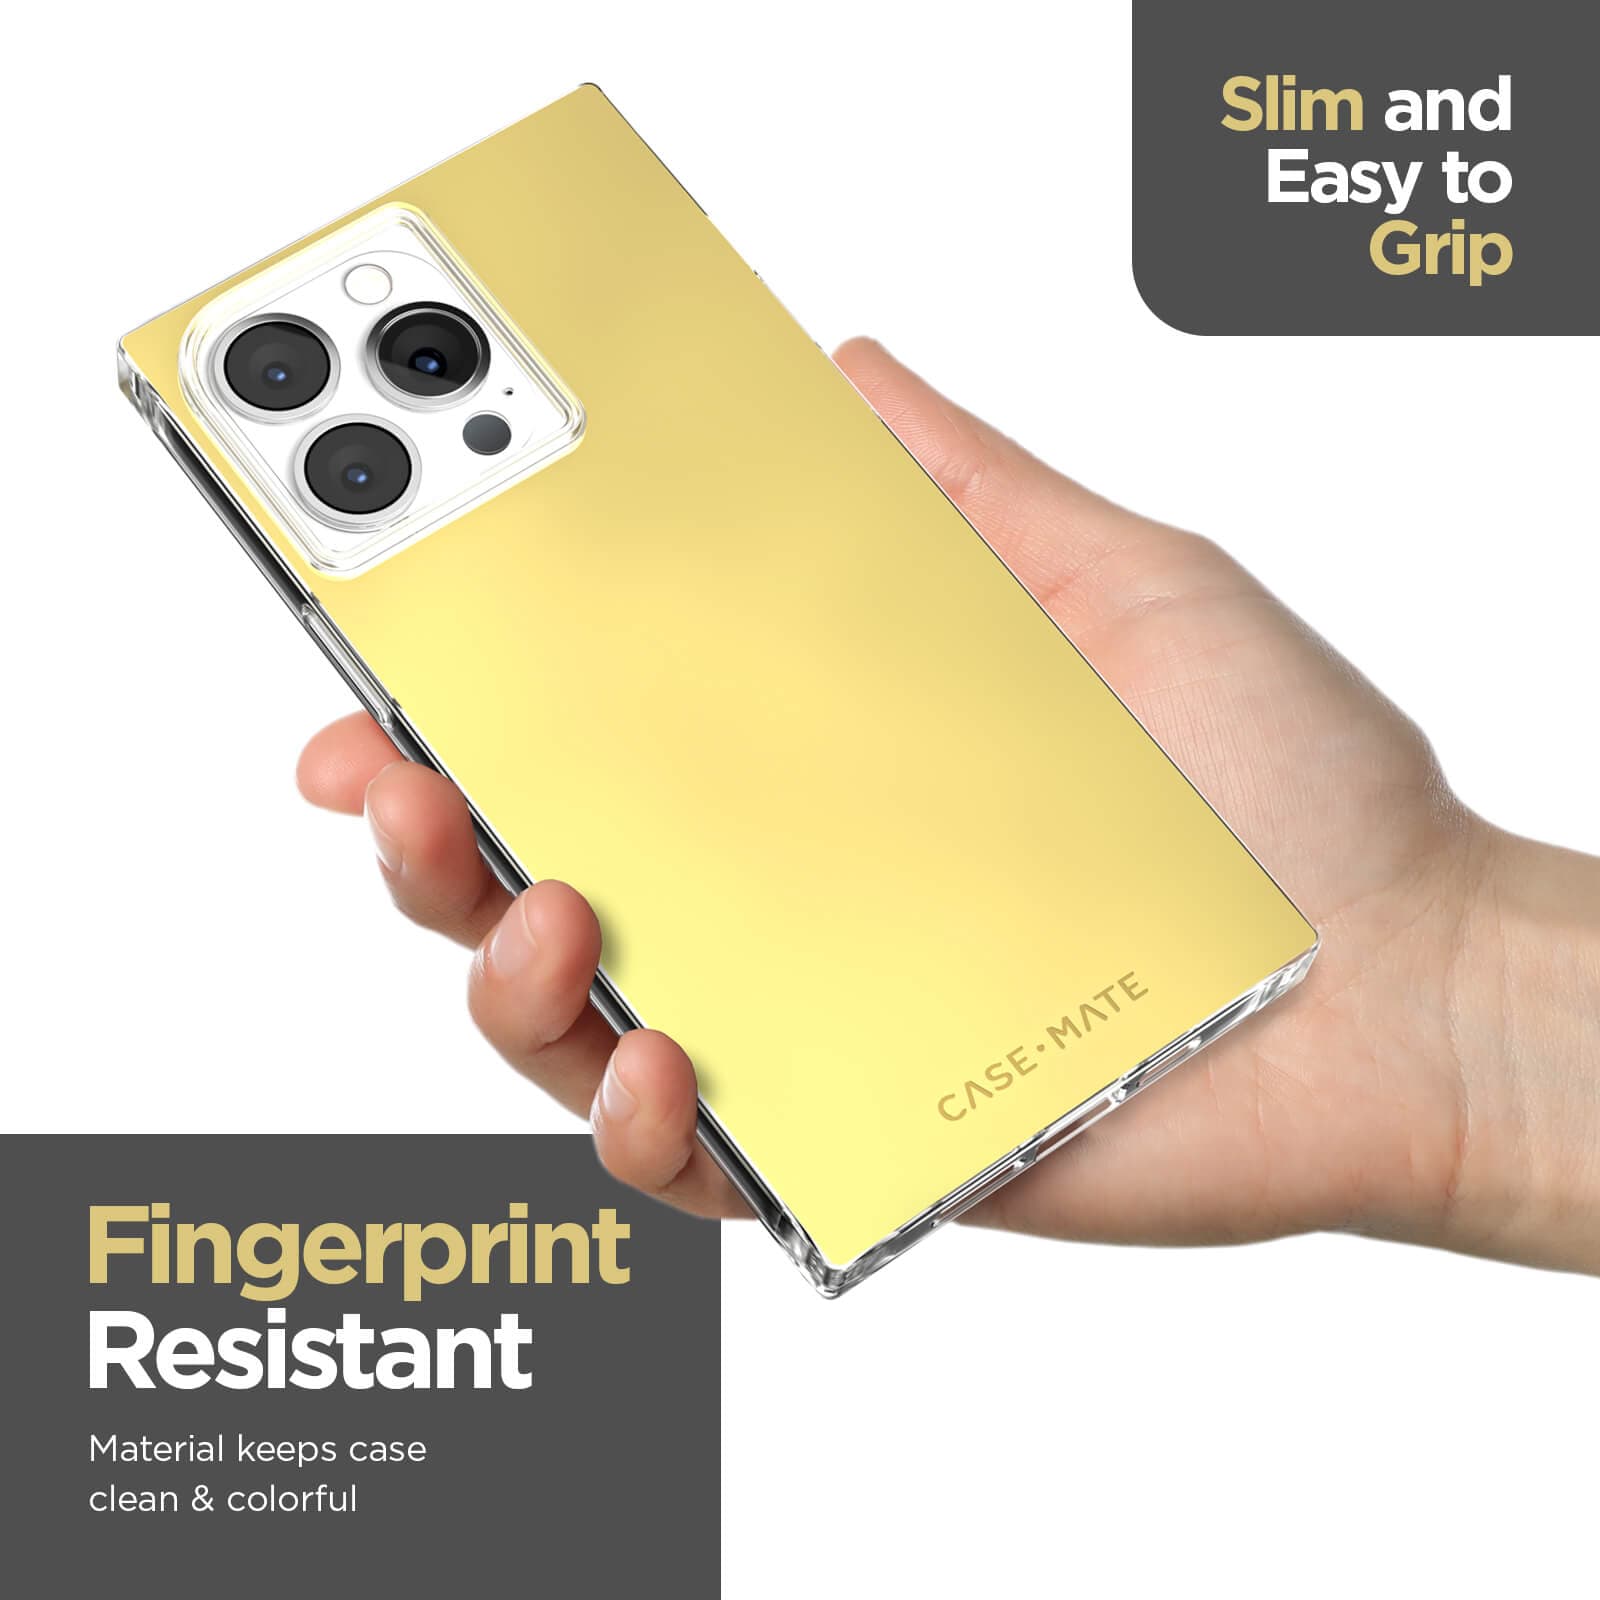 Slim and easy to grip. Fingerprint resistant material keeps case clean & colorful. color::Gold